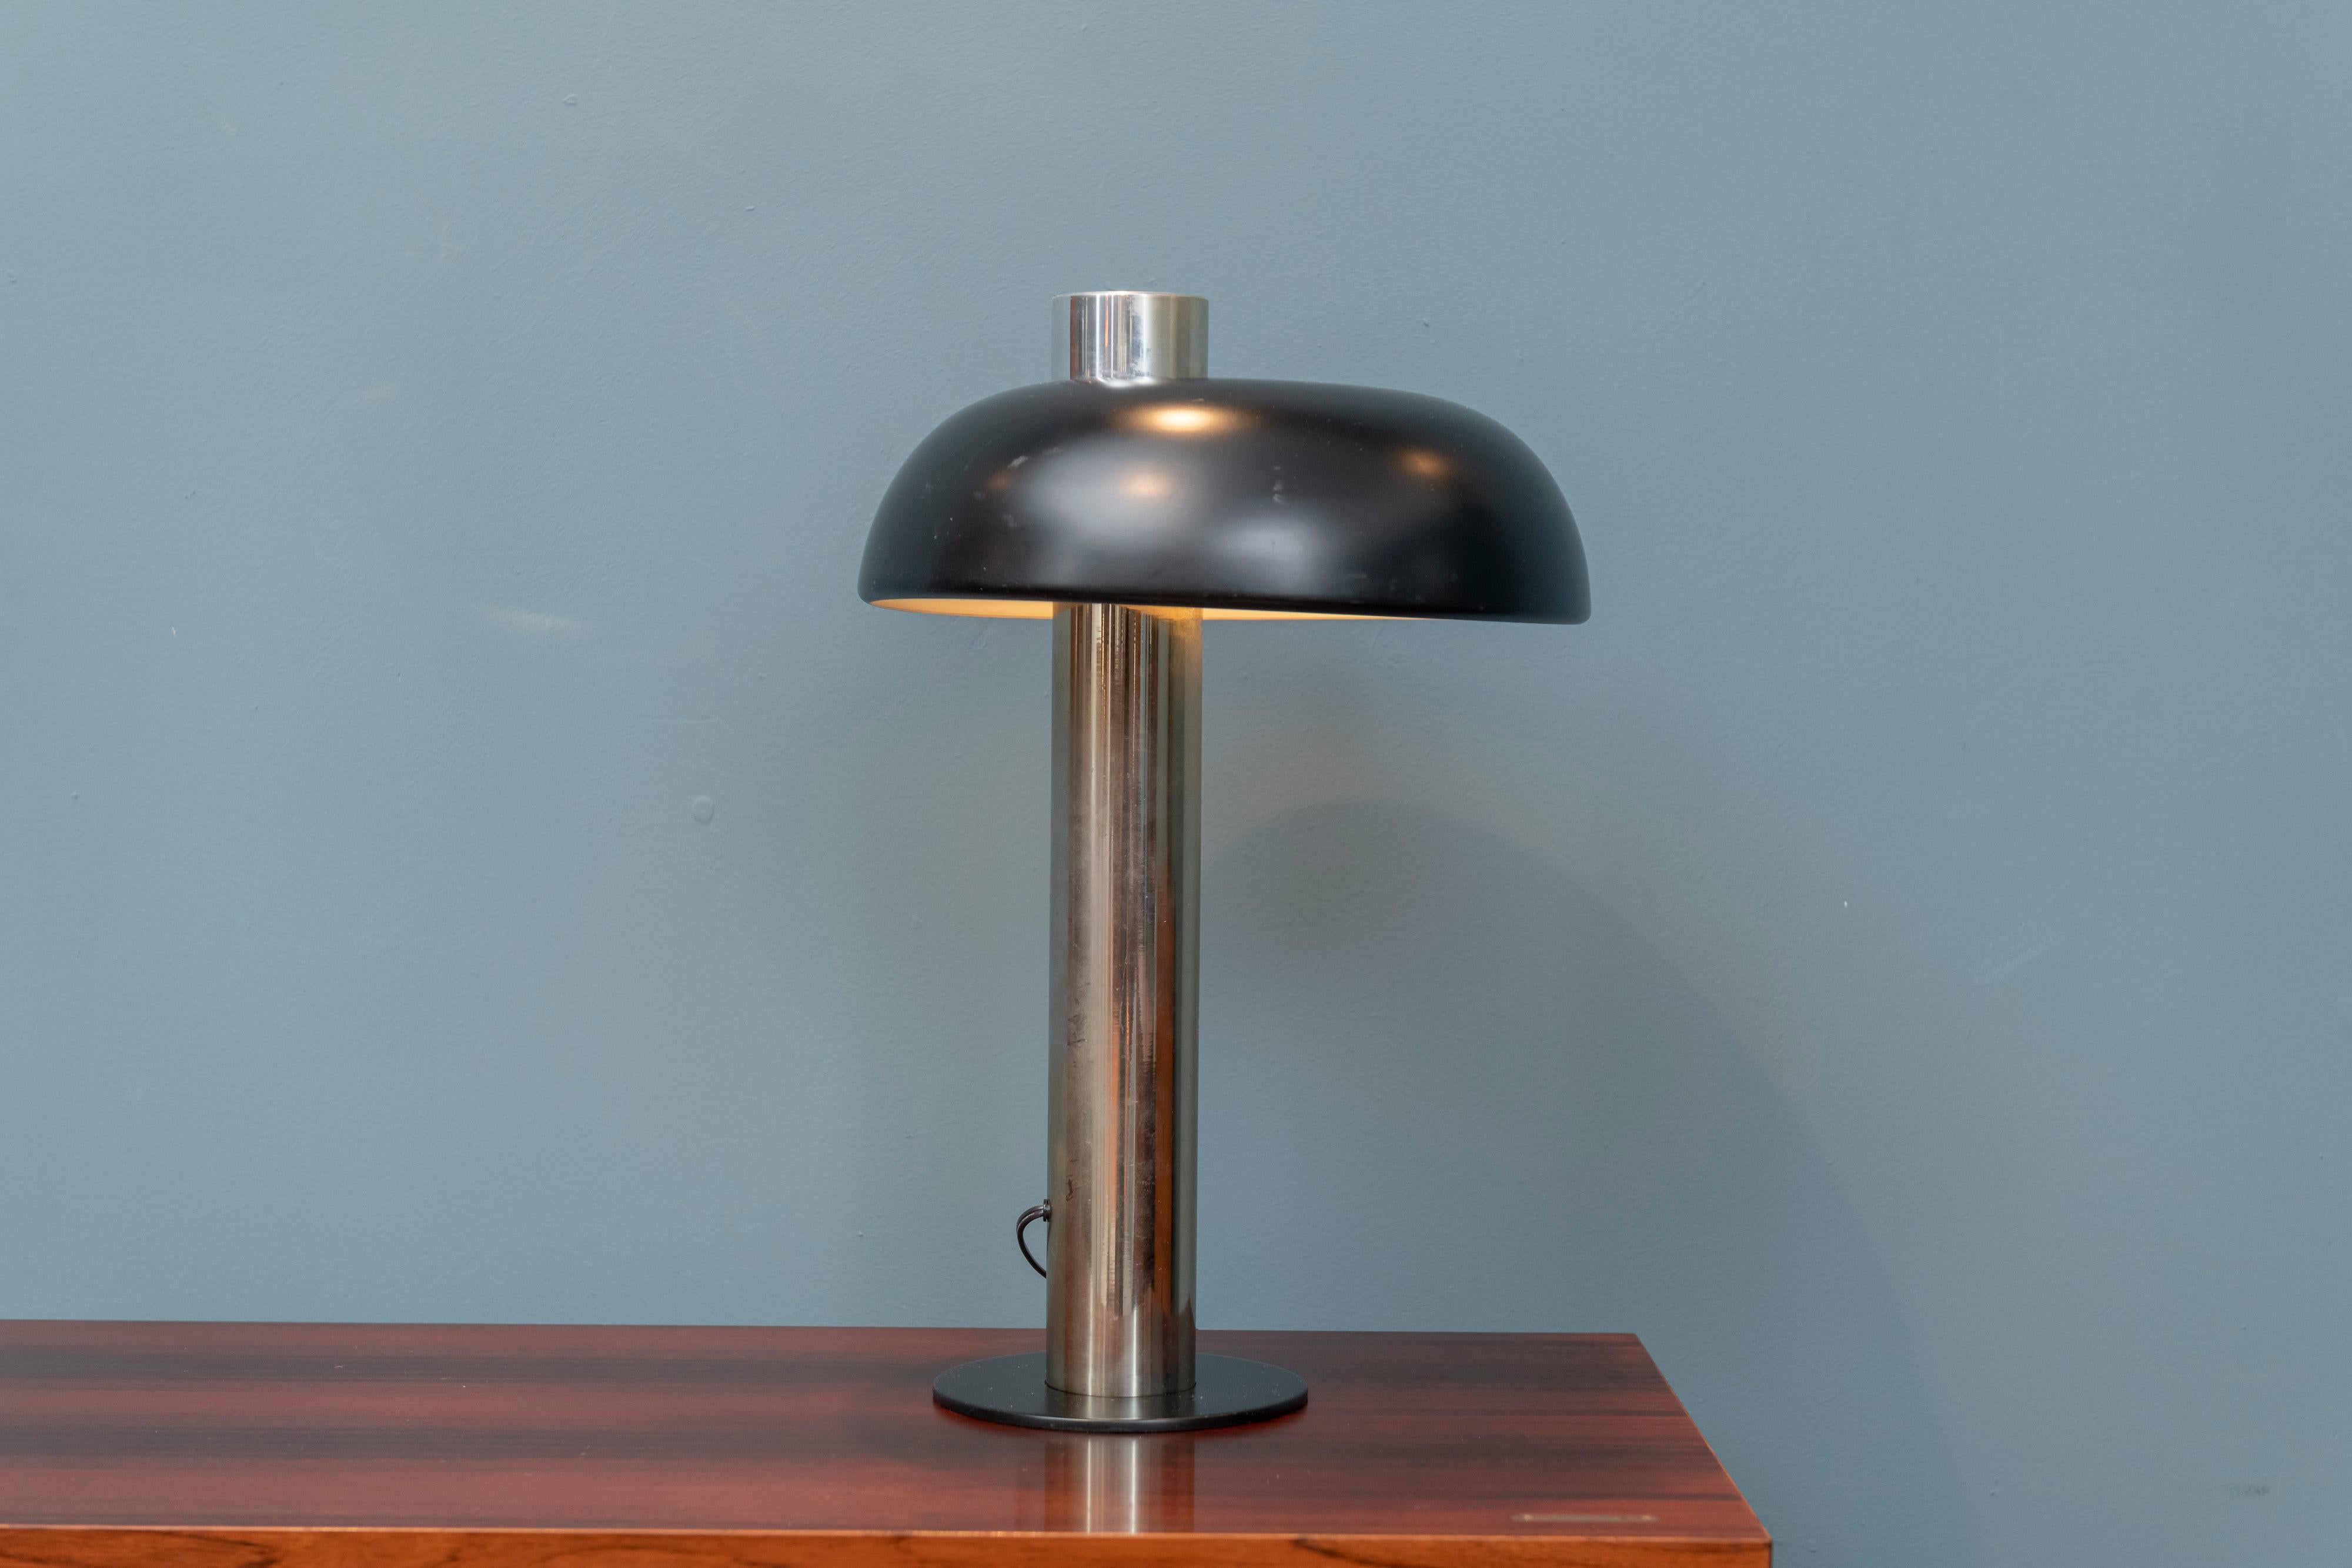 Mid-Century Modern table lamp by Laurel lamp Co. Chrome and black lacquer lamp in overall good vintage condition.